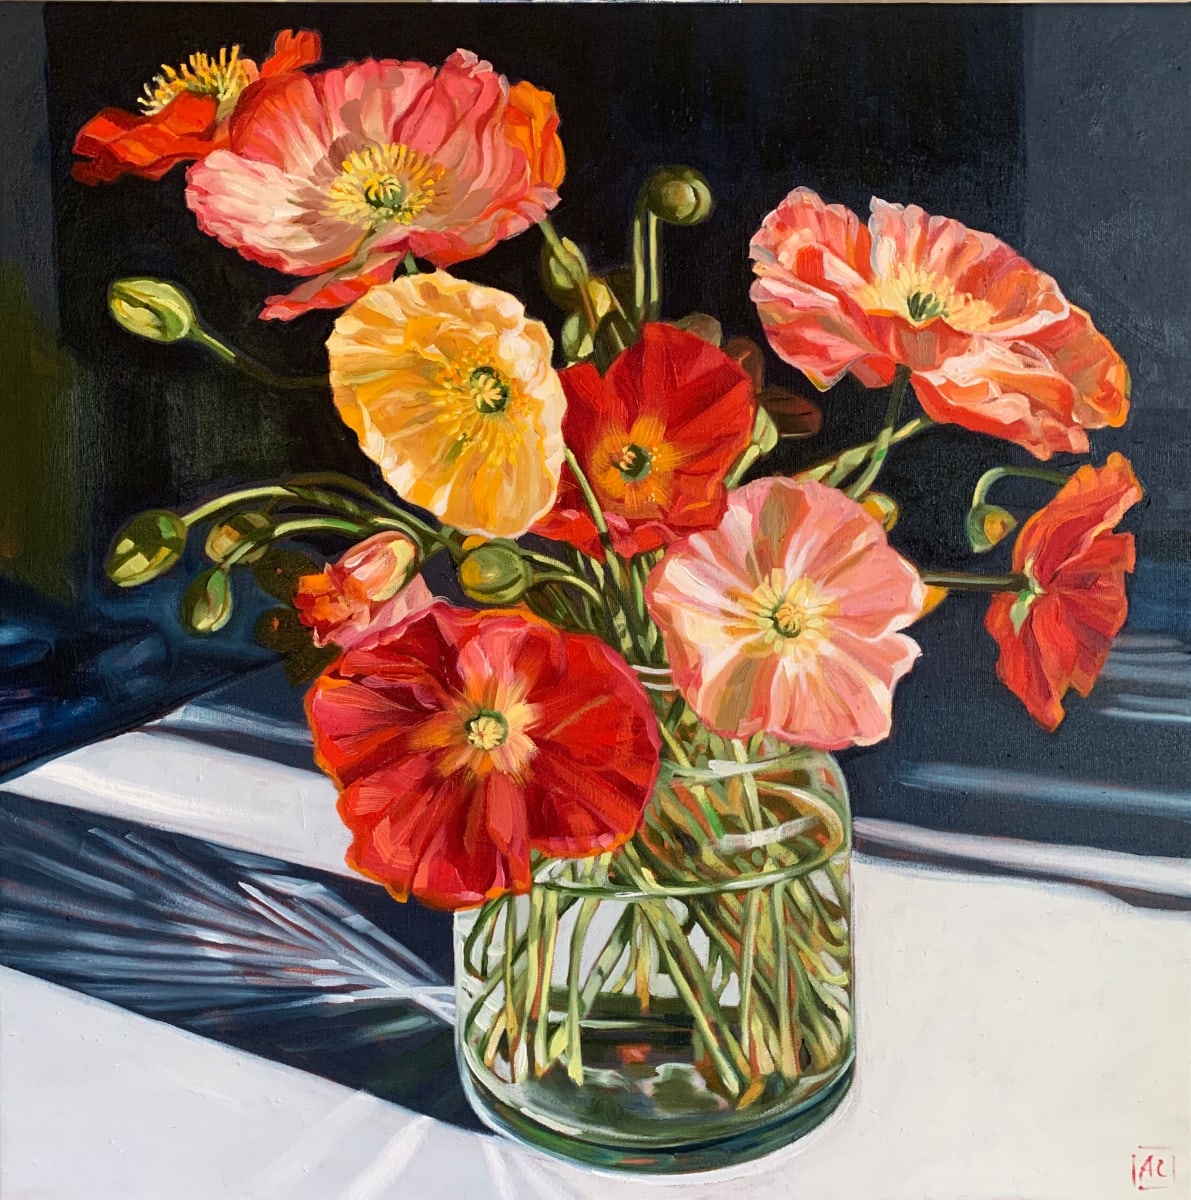 Poppies and Sunlight by Alicia Cornwell 